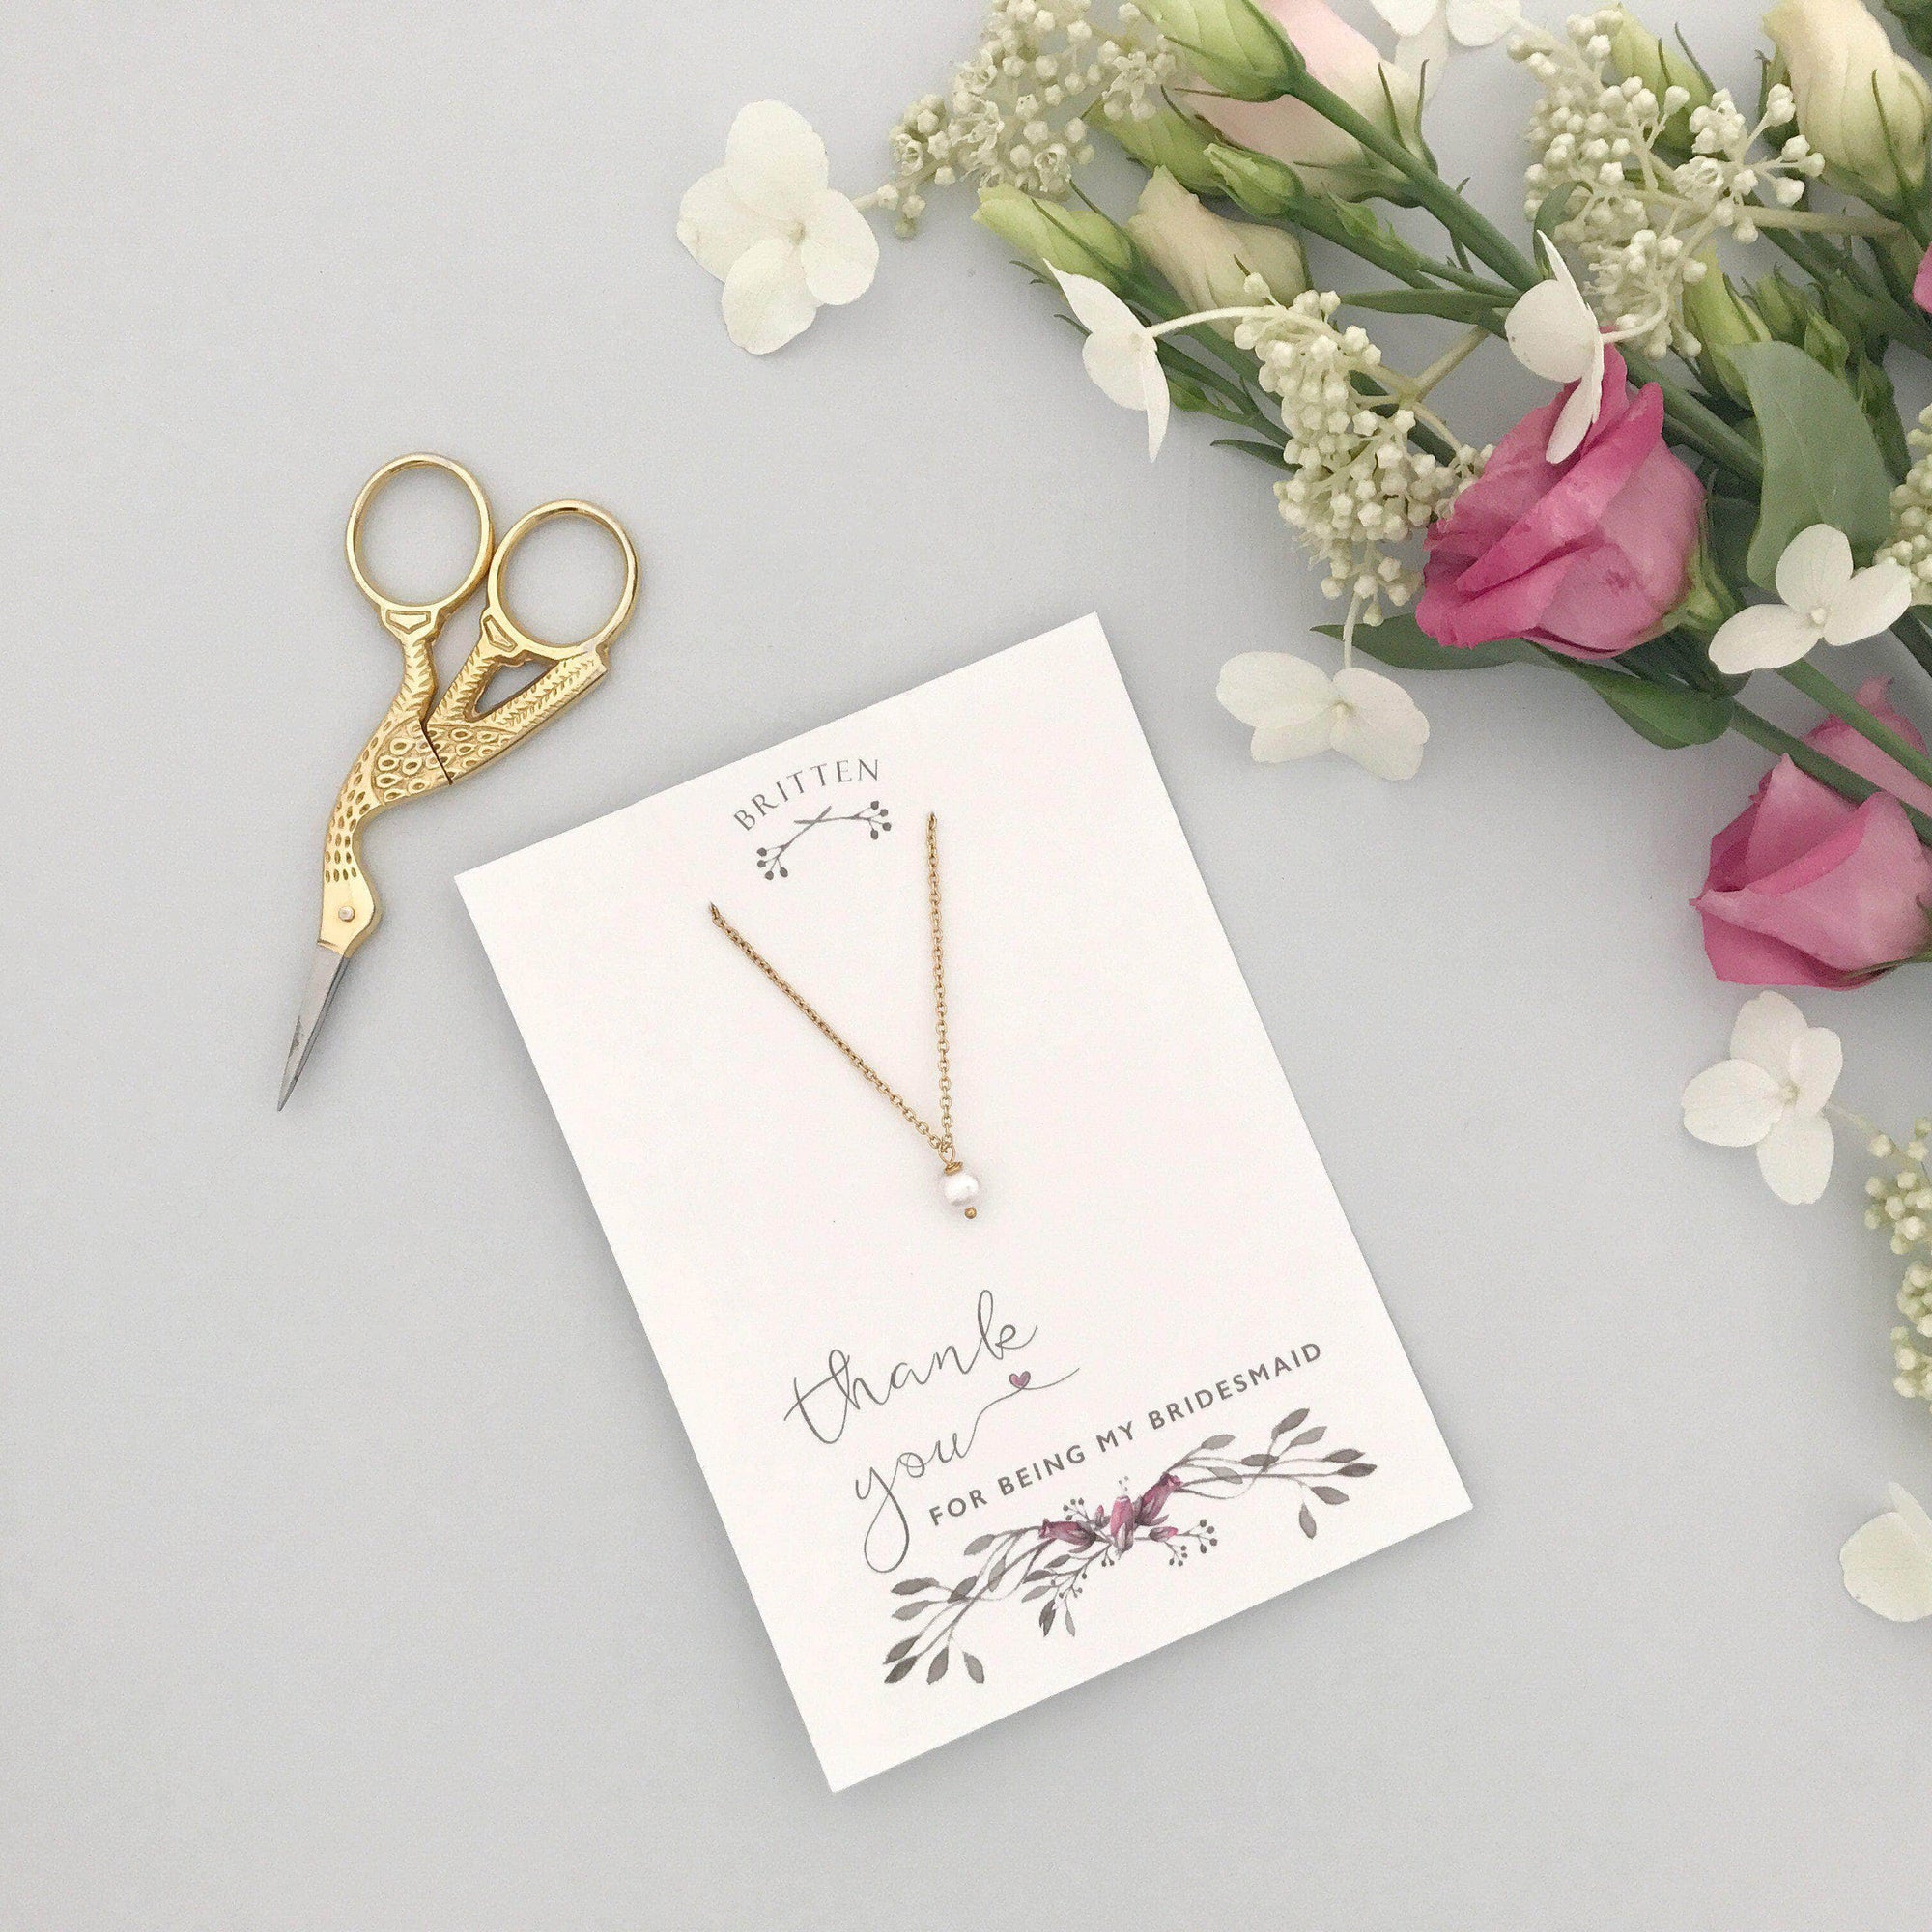 Bridesmaid Gift Gold Bridesmaid 'thank you' gift necklace - 'Seville' in gold